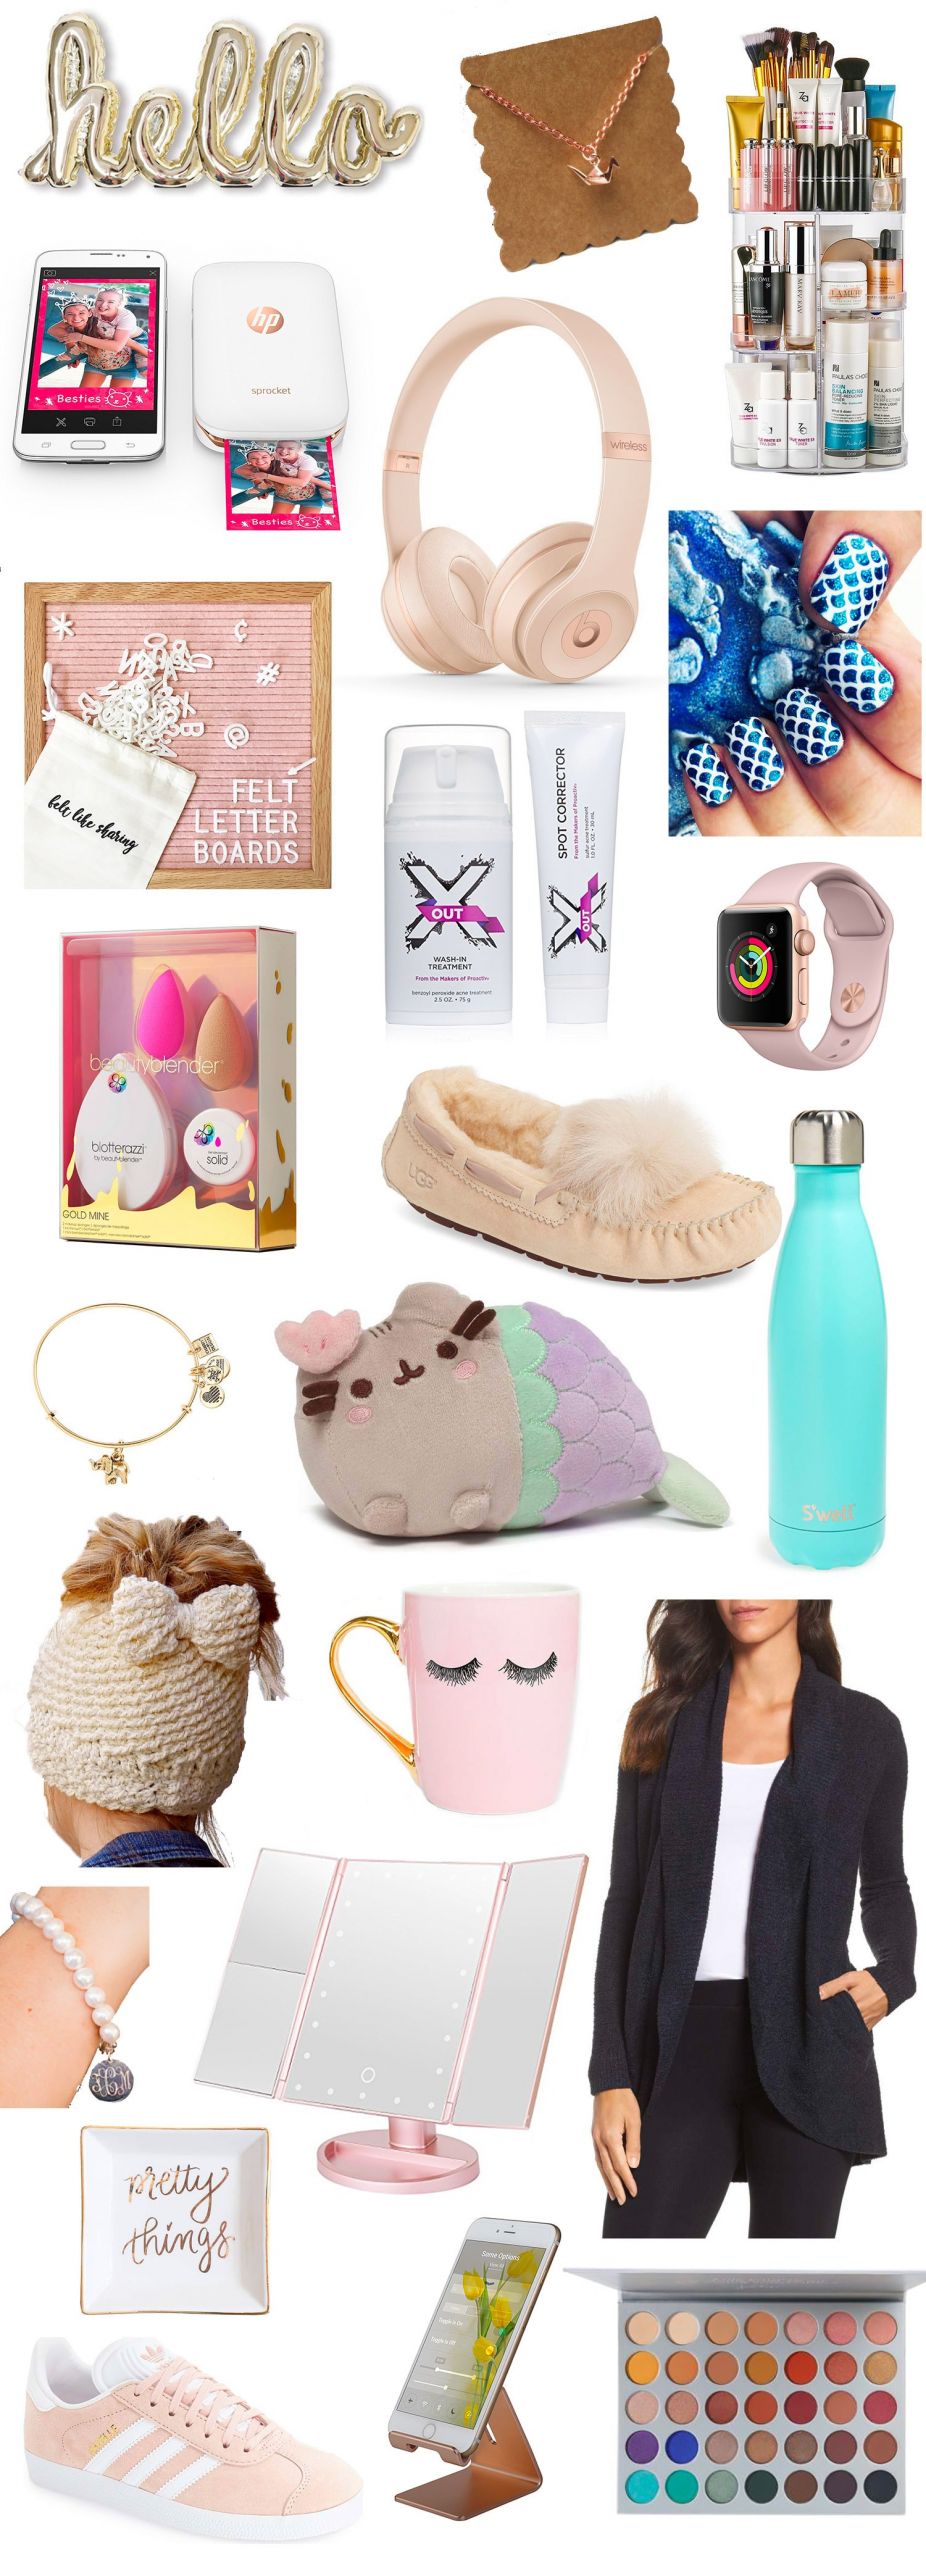 Best Gift Ideas For Teenage Girl
 Top Gifts for Teens This Christmas